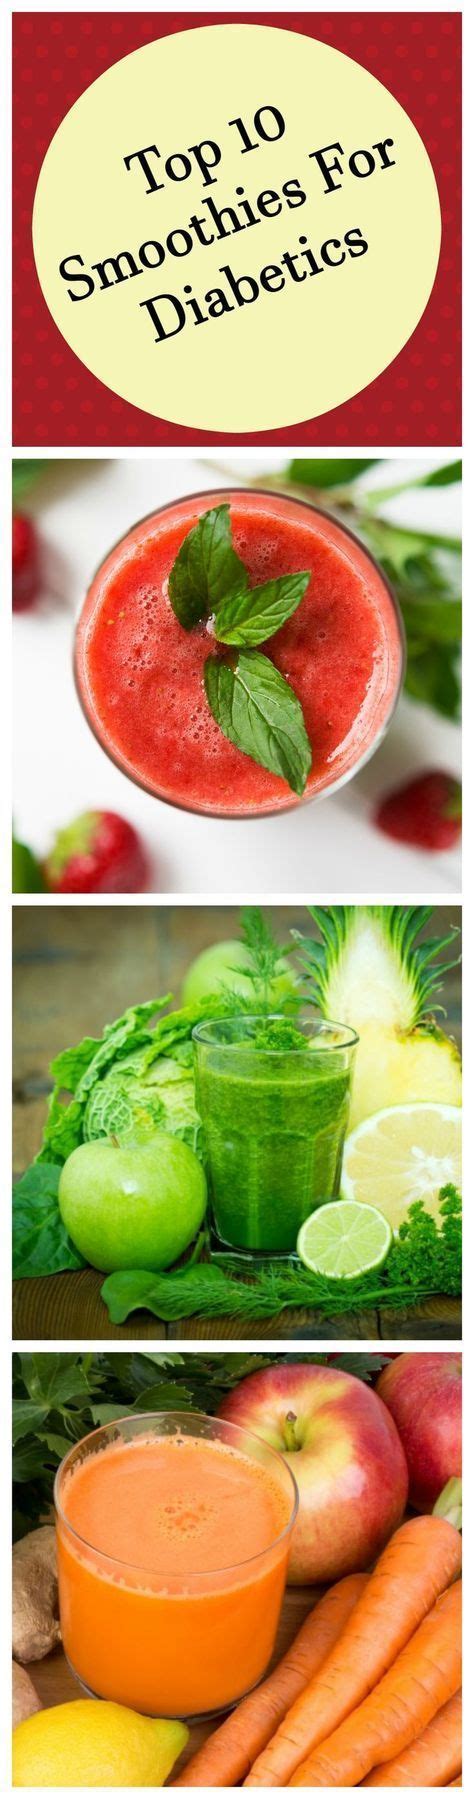 Juicing for diabetics juicing,benefits of juicing for diabetics bitter gourd diabetes juice reverse your type 2 diabetes. 10 Delicious Smoothies for Diabetics | Diabetic smoothie recipes, Easy juice recipes, Diabetic ...